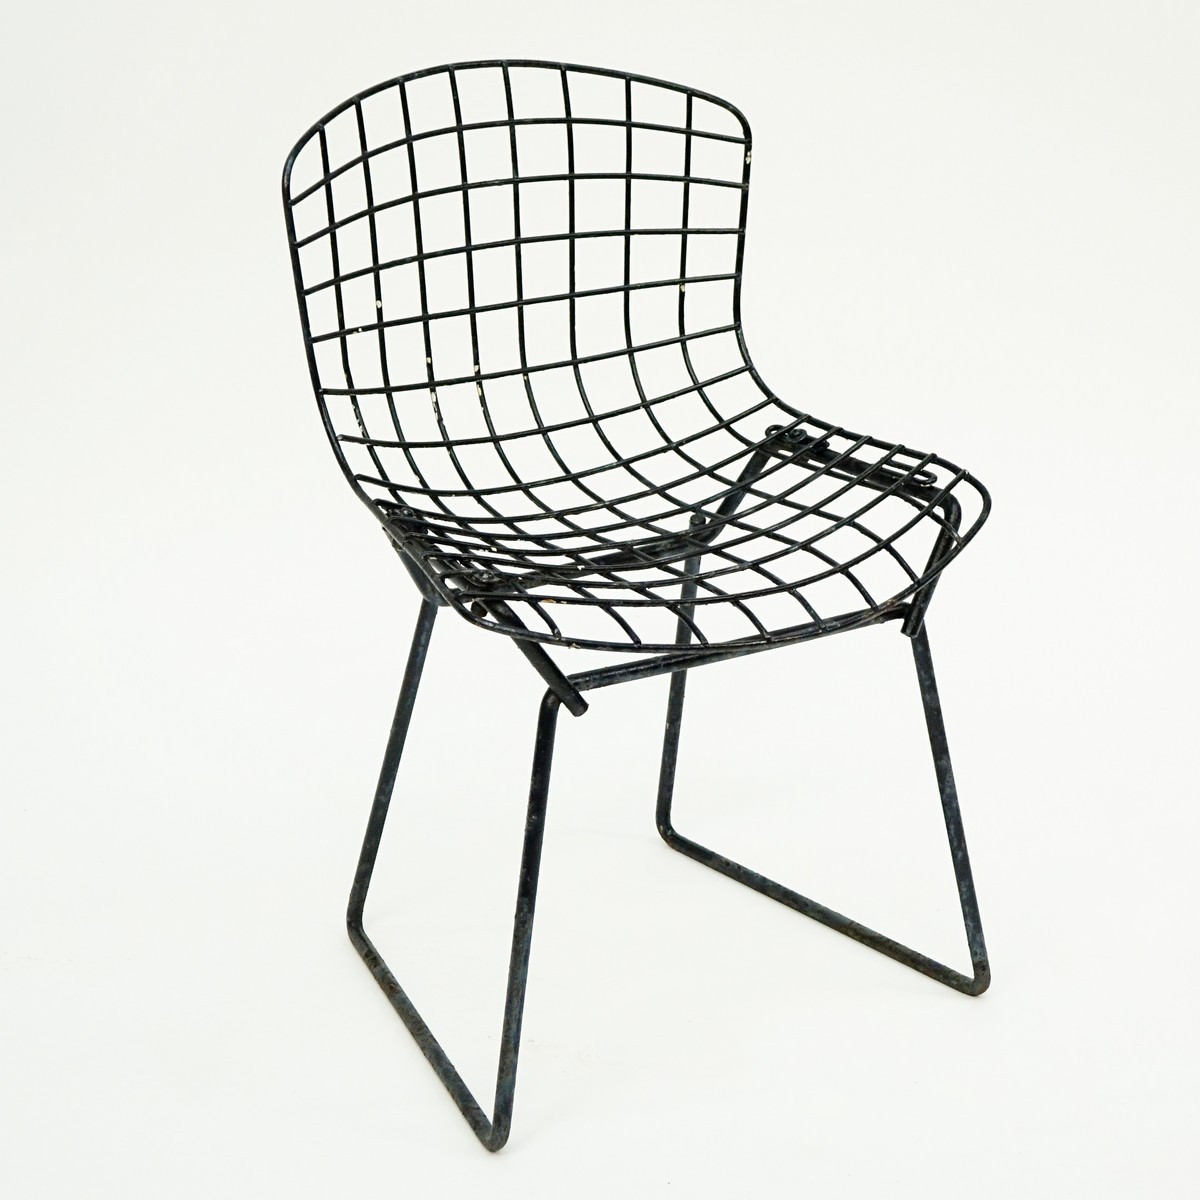 Mid Century Modern Knoll Bertoia Child's Side Chair. Some rubbing and rust to surface. Measures 20"